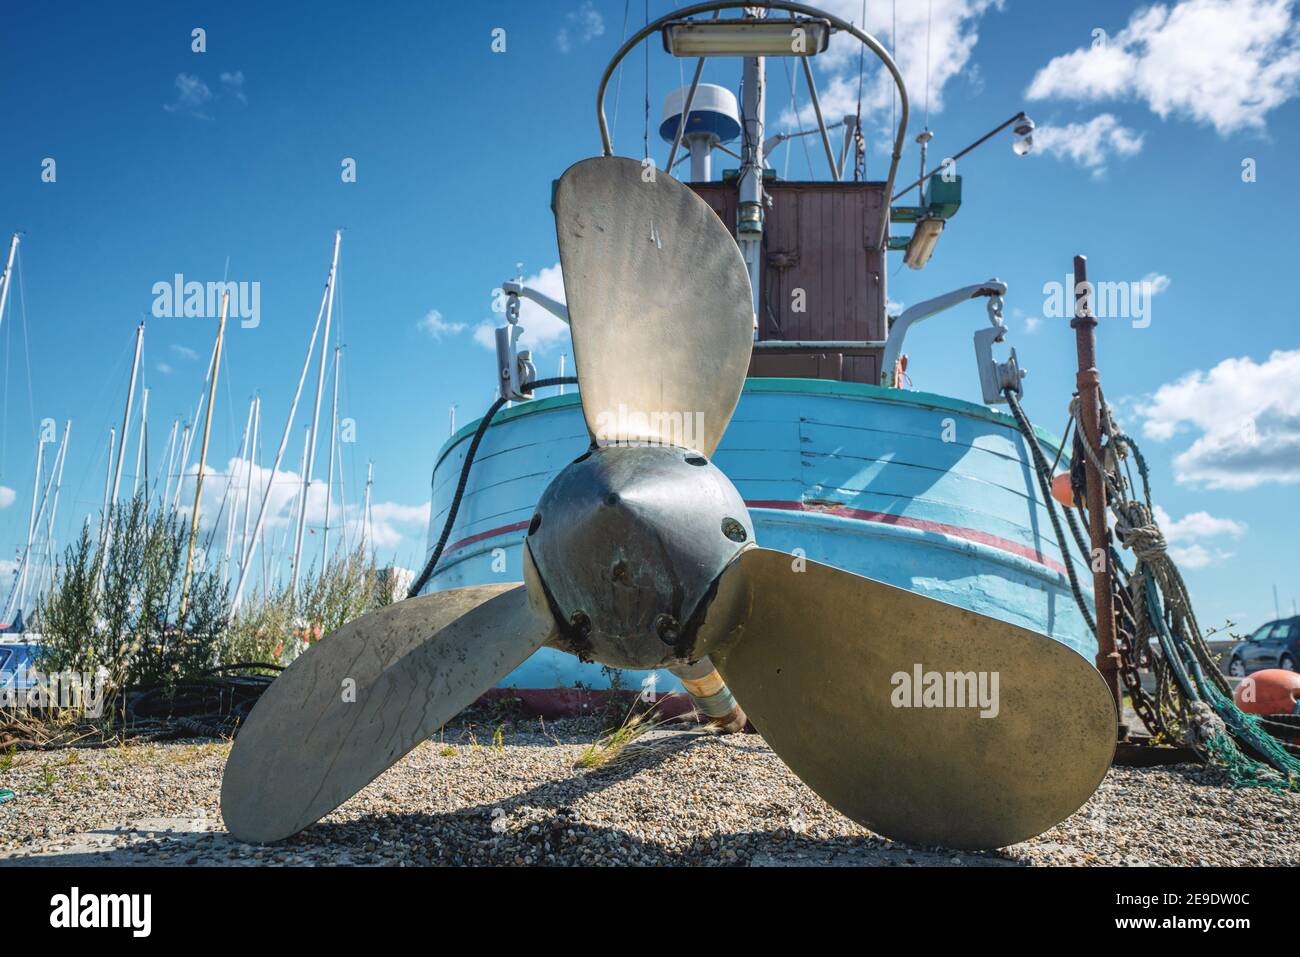 https://c8.alamy.com/comp/2E9DW0C/fishing-boat-with-a-large-propeller-on-land-at-a-marine-harbor-in-the-summer-2E9DW0C.jpg